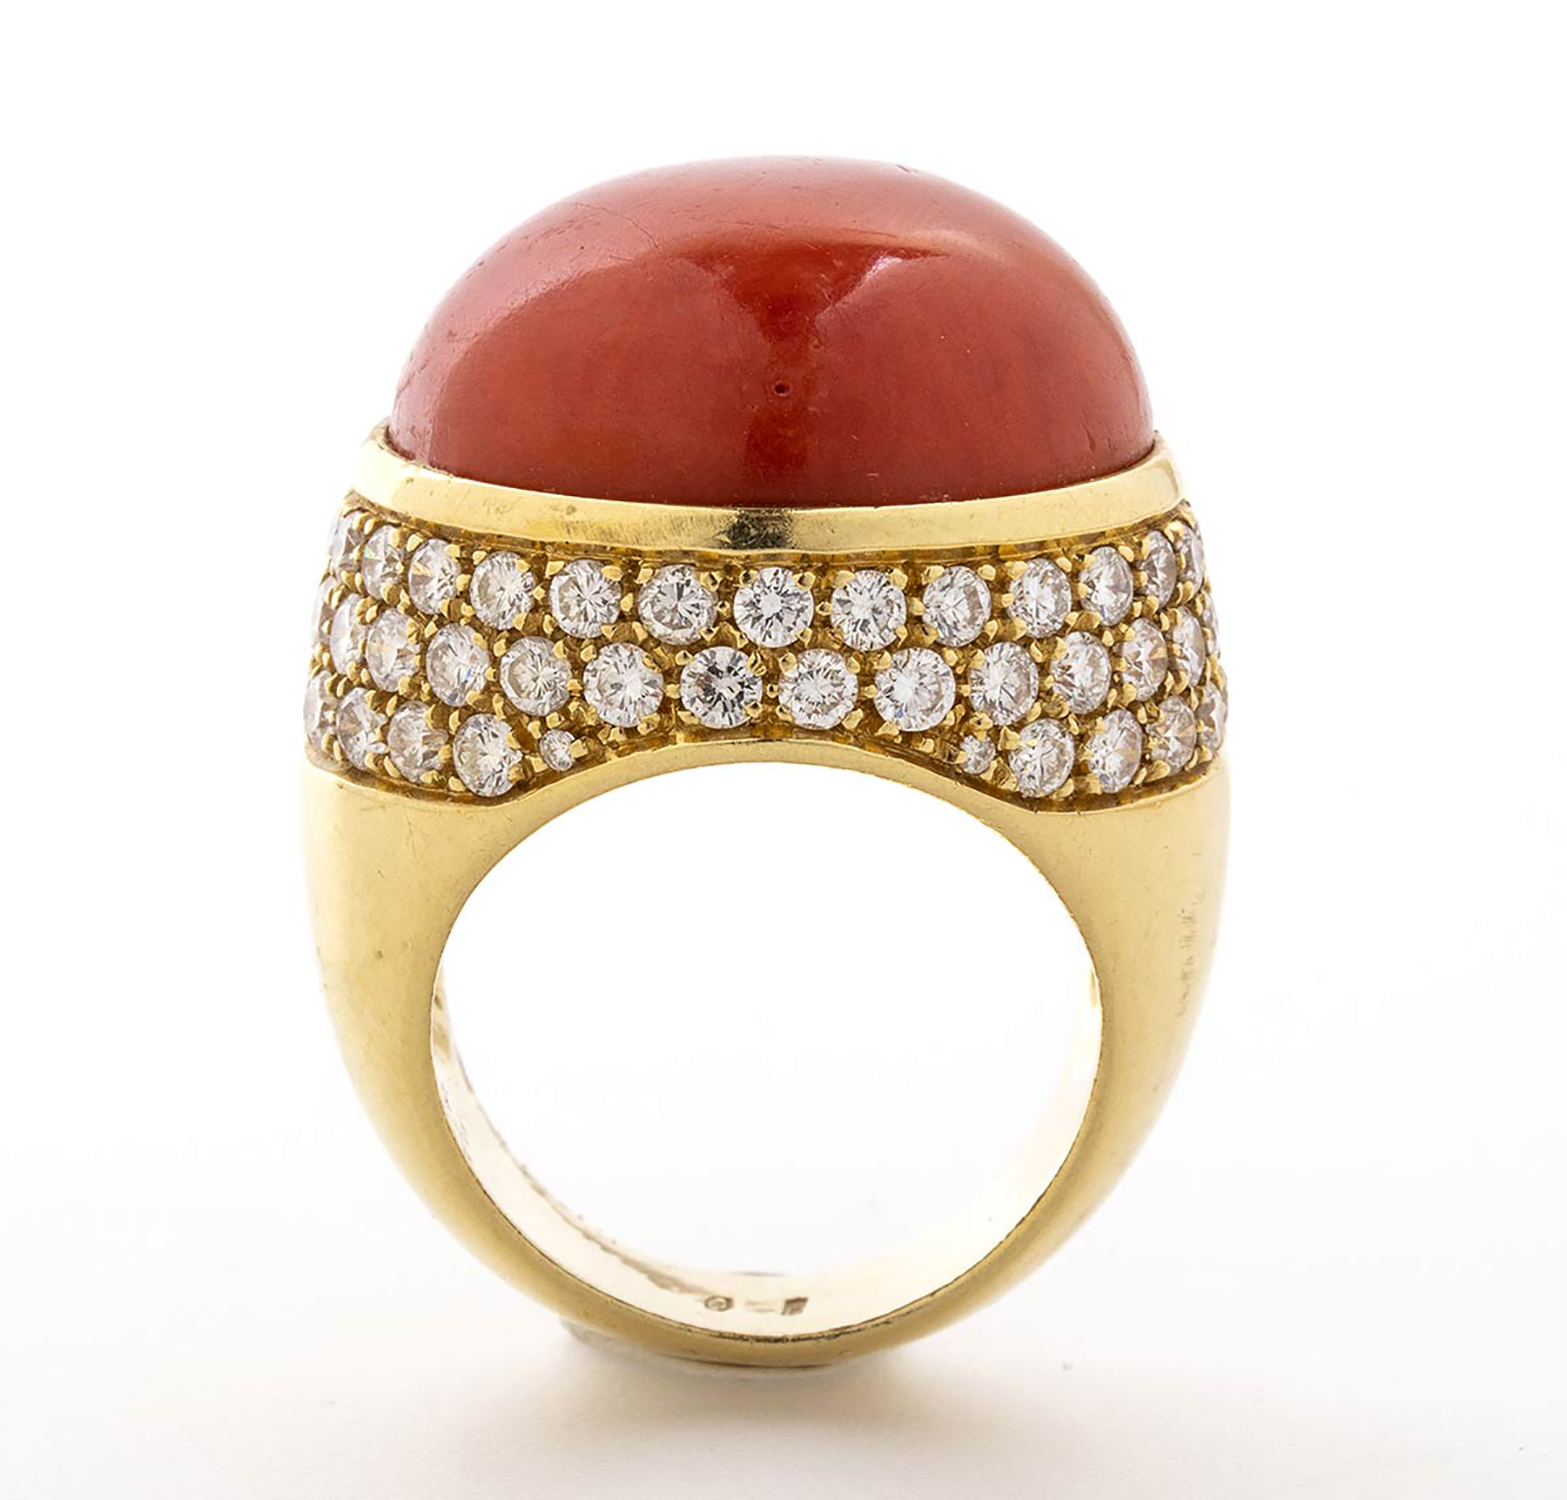 Cerasuolo coral and diamonds ring - Image 3 of 9